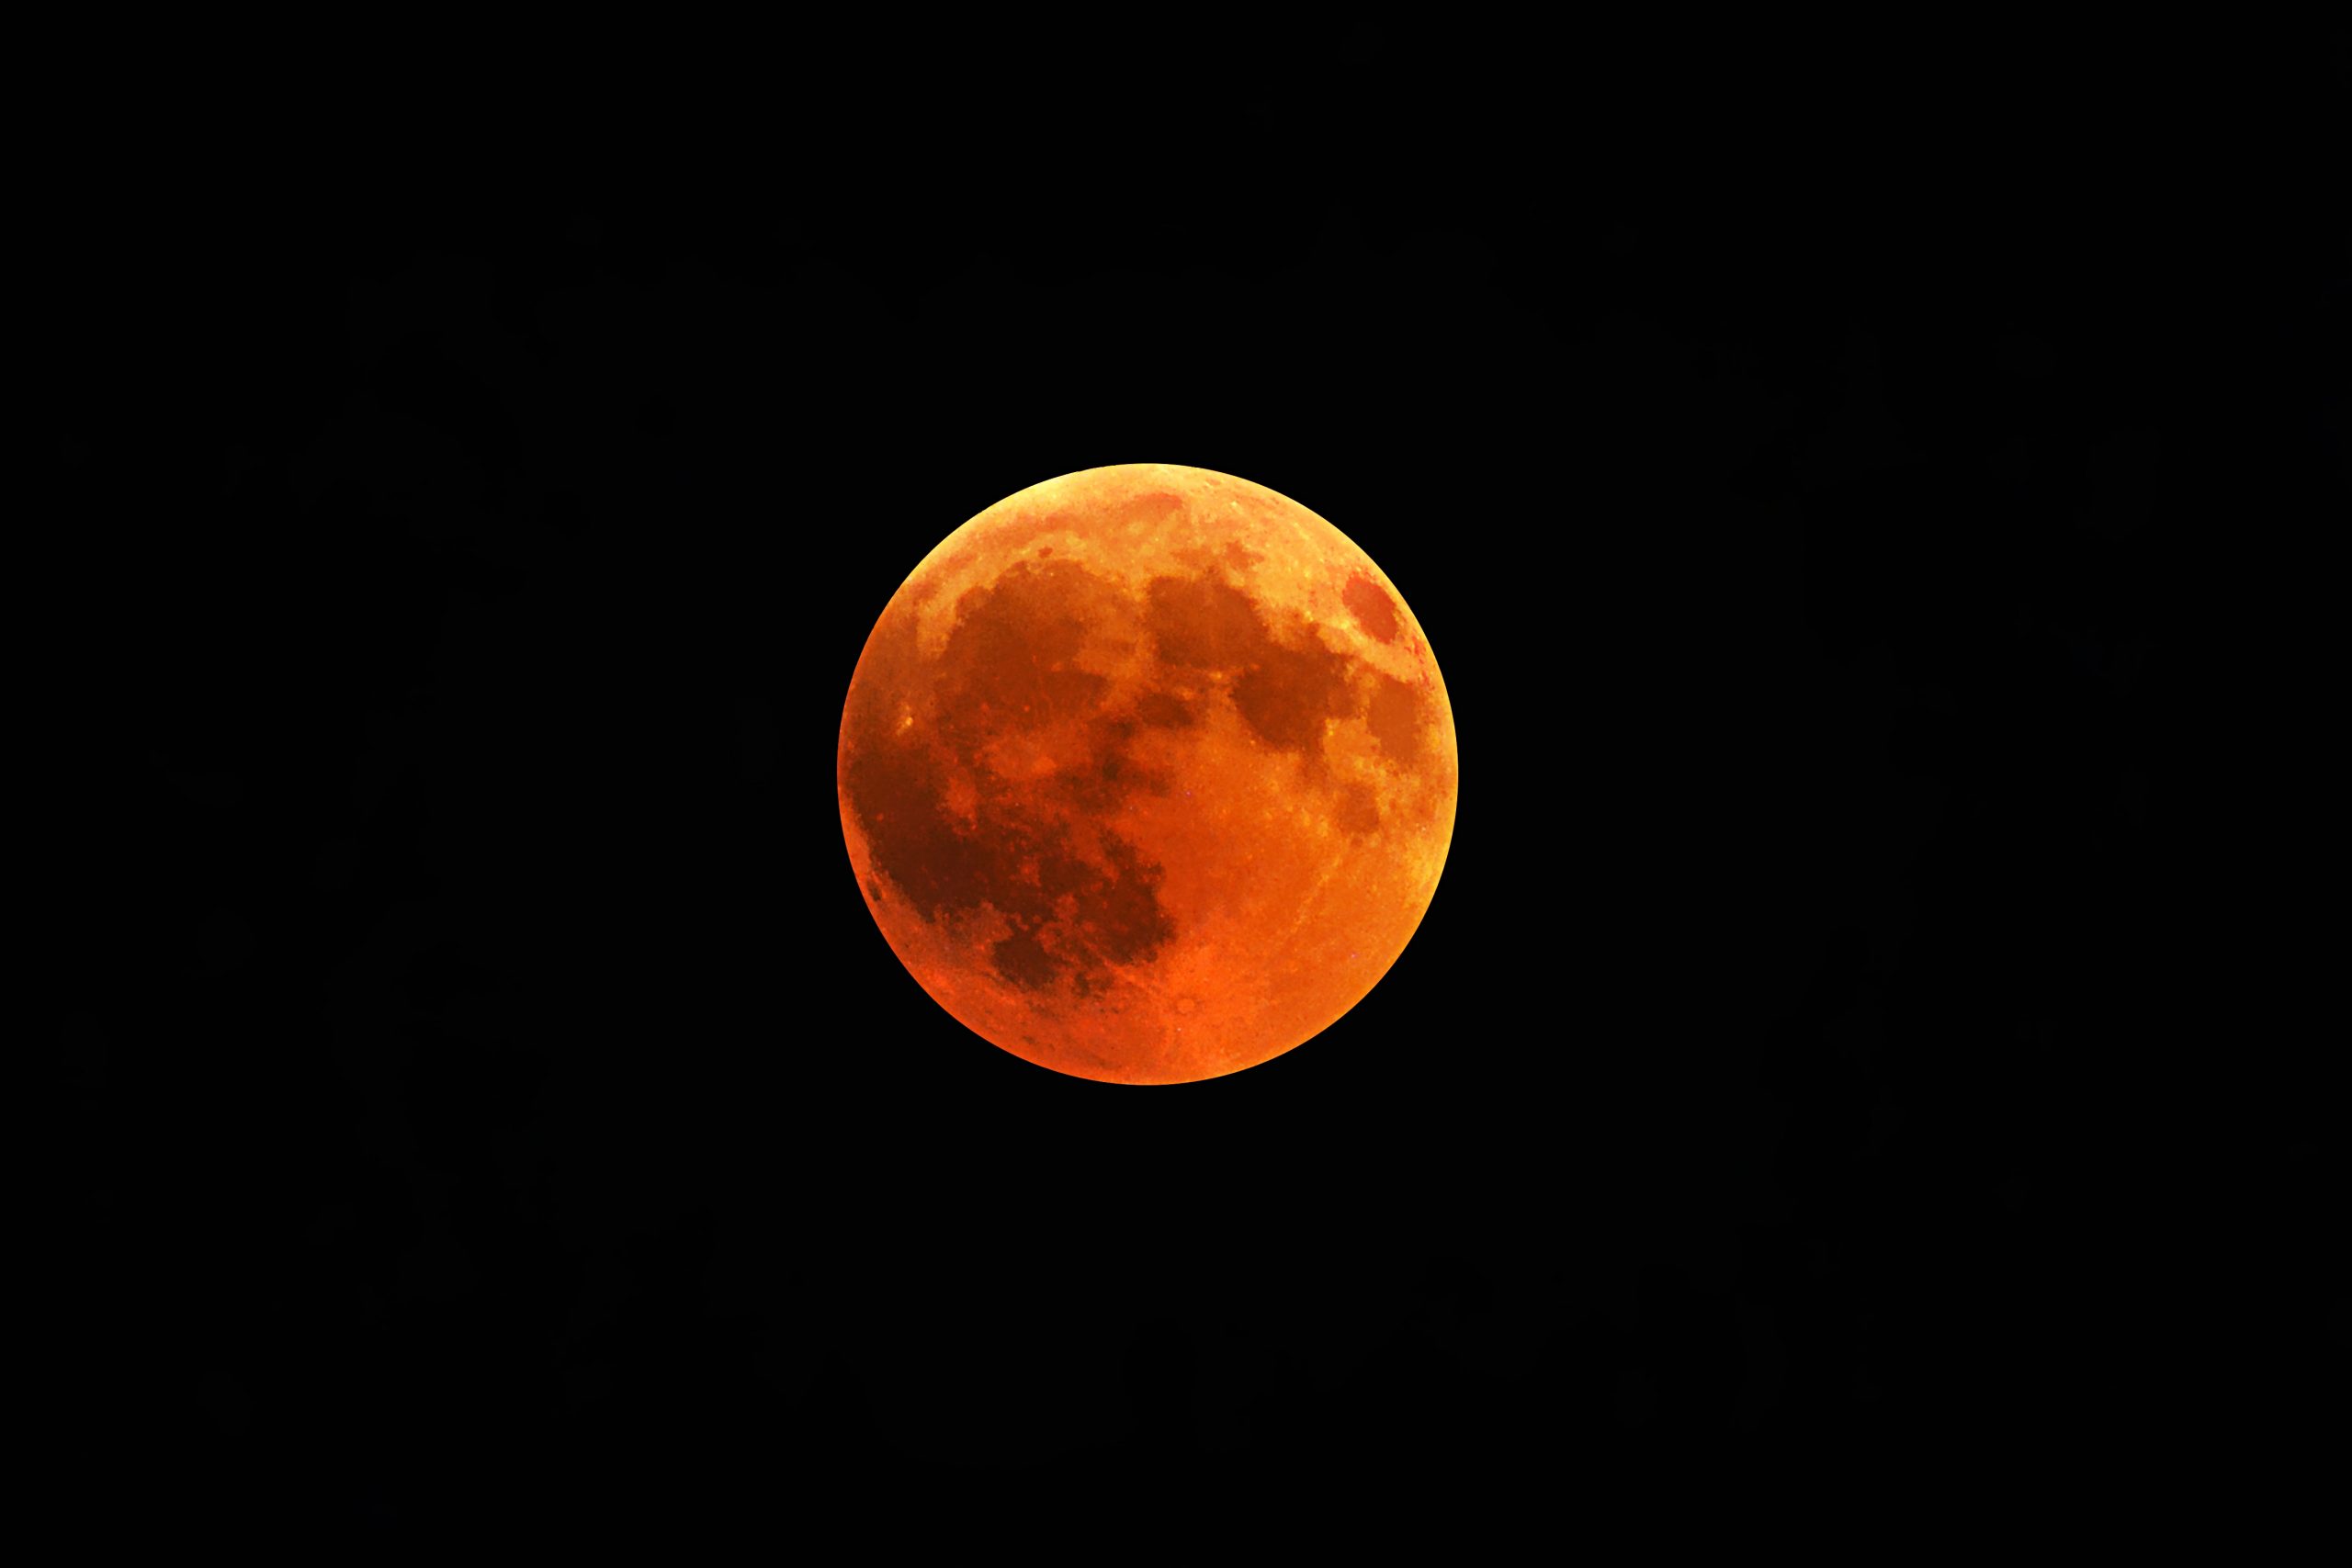 beautiful-shot-of-a-red-moon-total-lunar-eclipse-with-a-black-night-sky-in-the-background